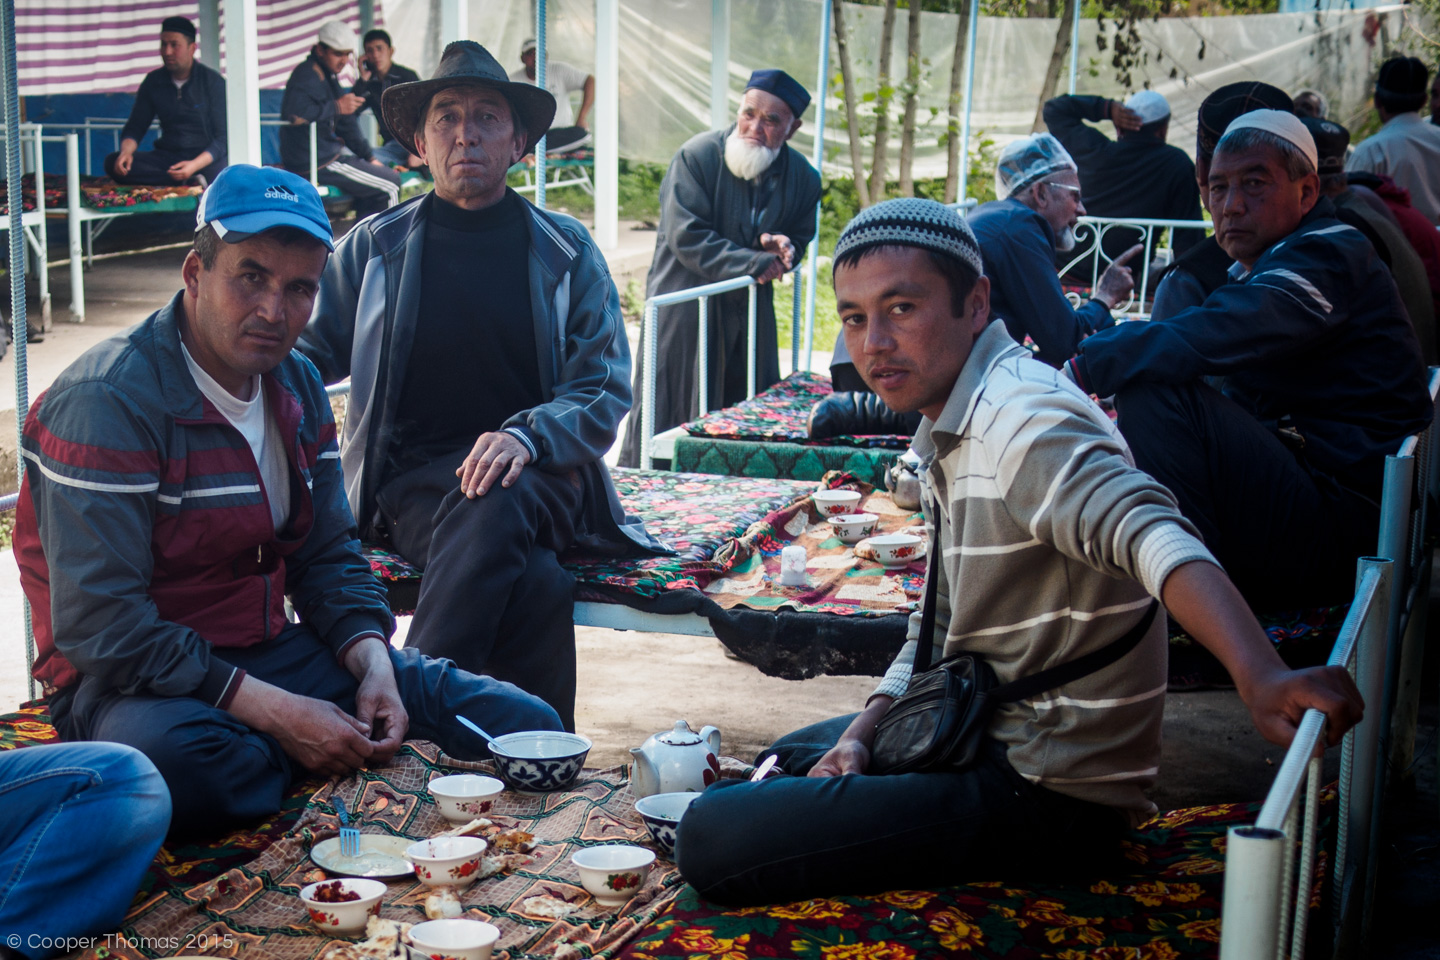 Locals enjoying a typical chaikhana lunch of meat, bread, and tea